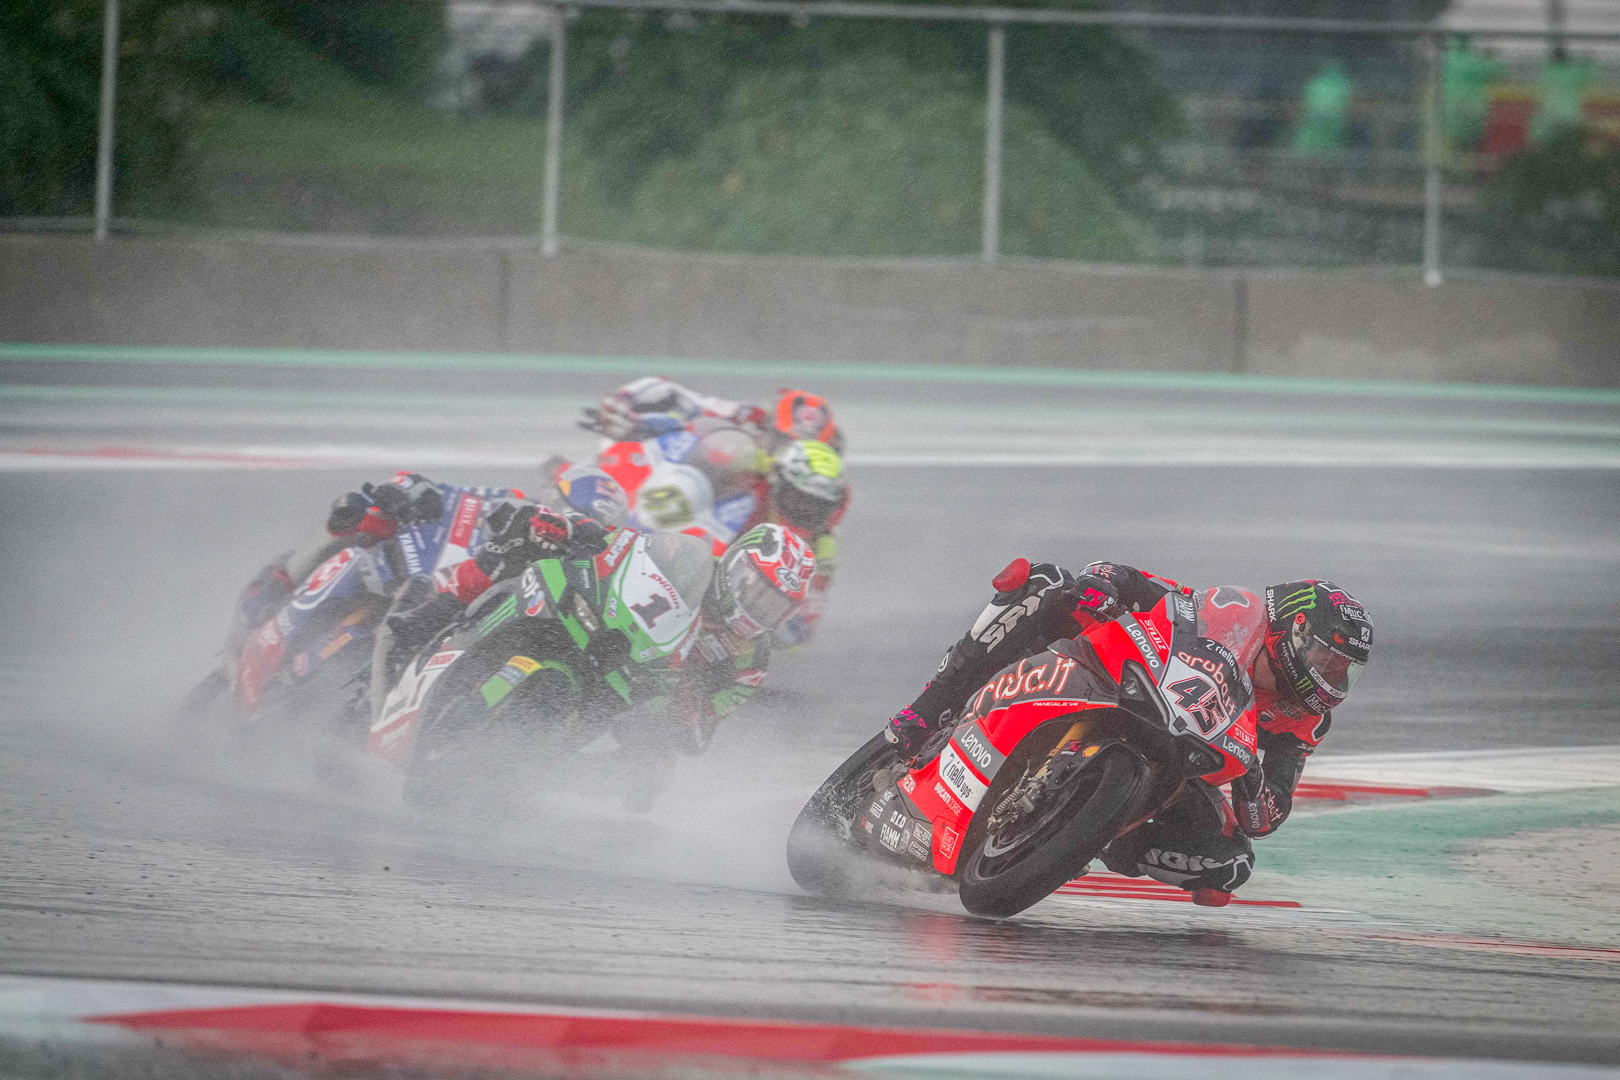 Redding closes out 2021 WorldSBK season by taking two podium finishes, Rinaldi crashes in the last lap after a great recovery